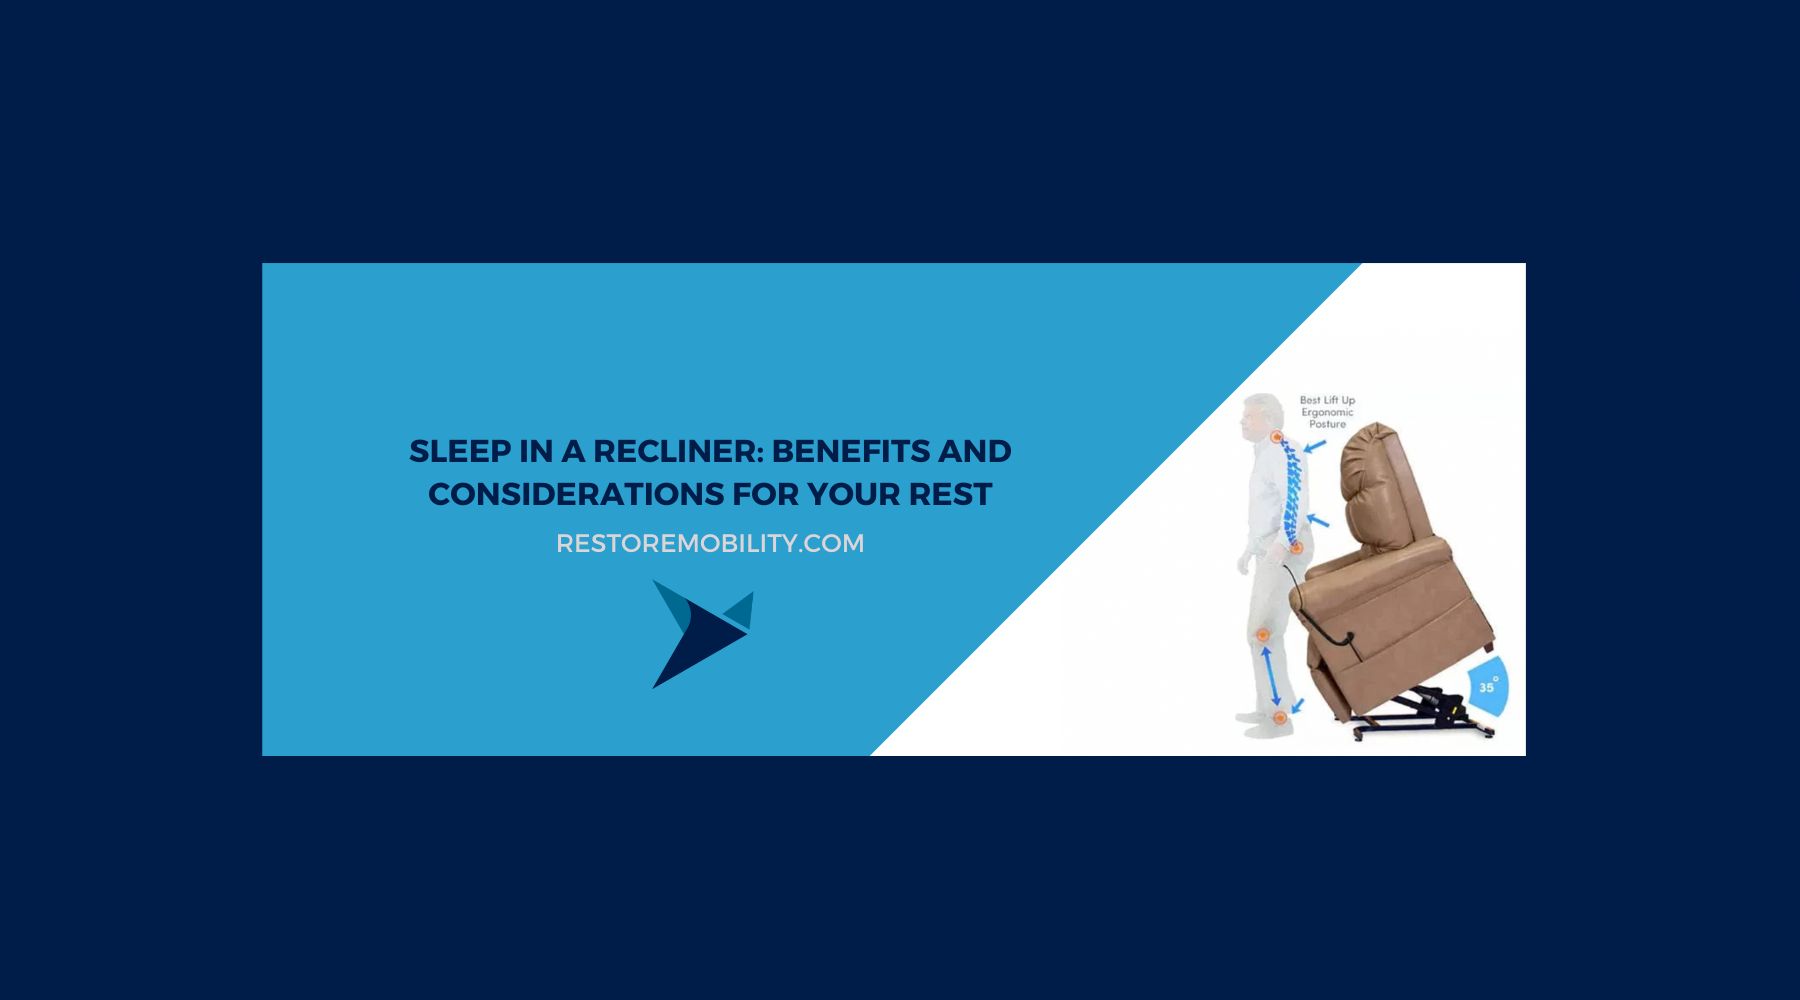 Sleep In A Recliner: Benefits And Considerations For Your Rest